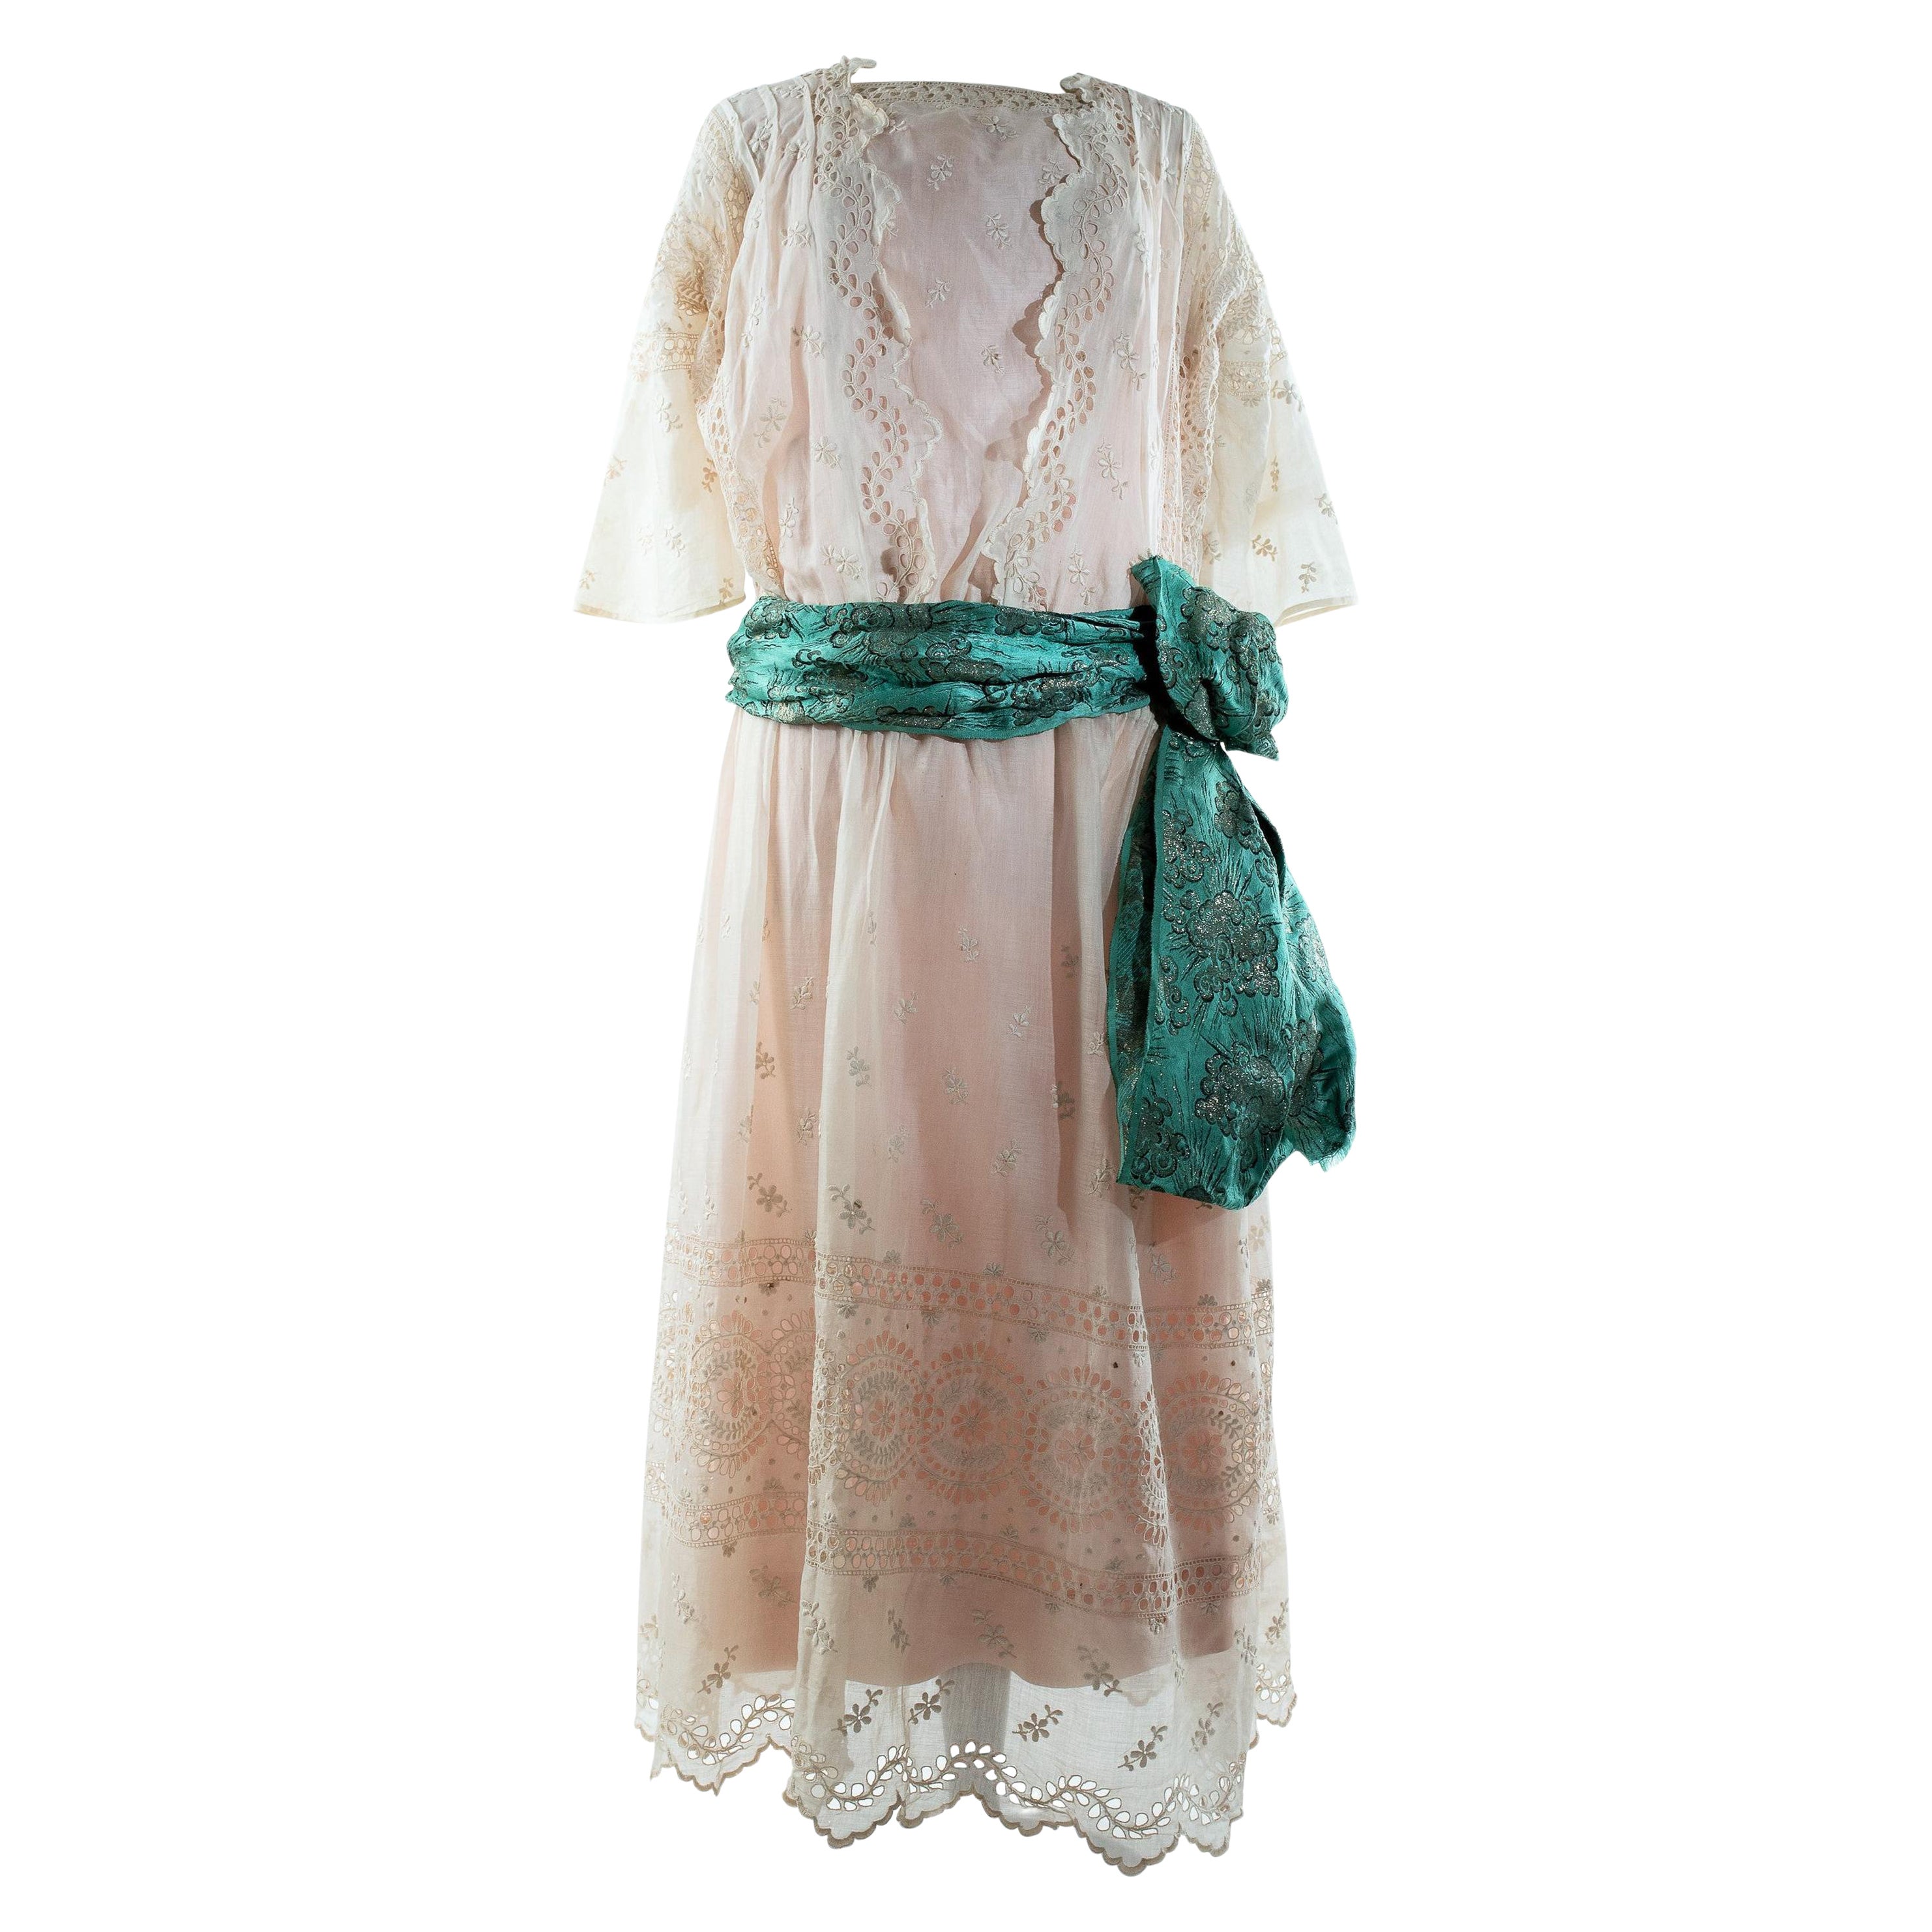 A silk pongee & White Embroidery Chiffon Summer Dress - France Circa 1920 For Sale